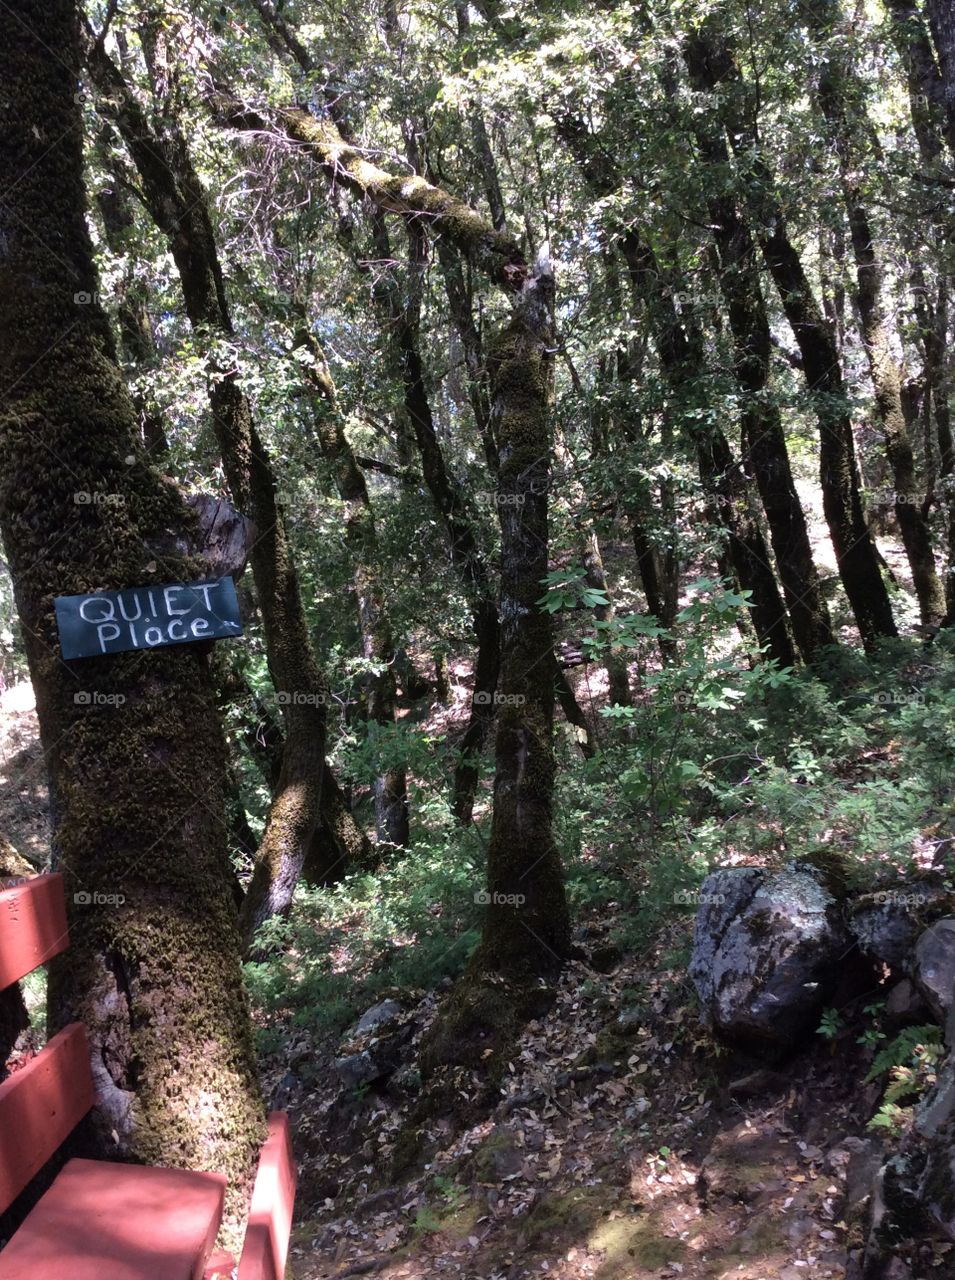 "Quiet Place" in Wilderness. Quiet place sign in wilderness setting